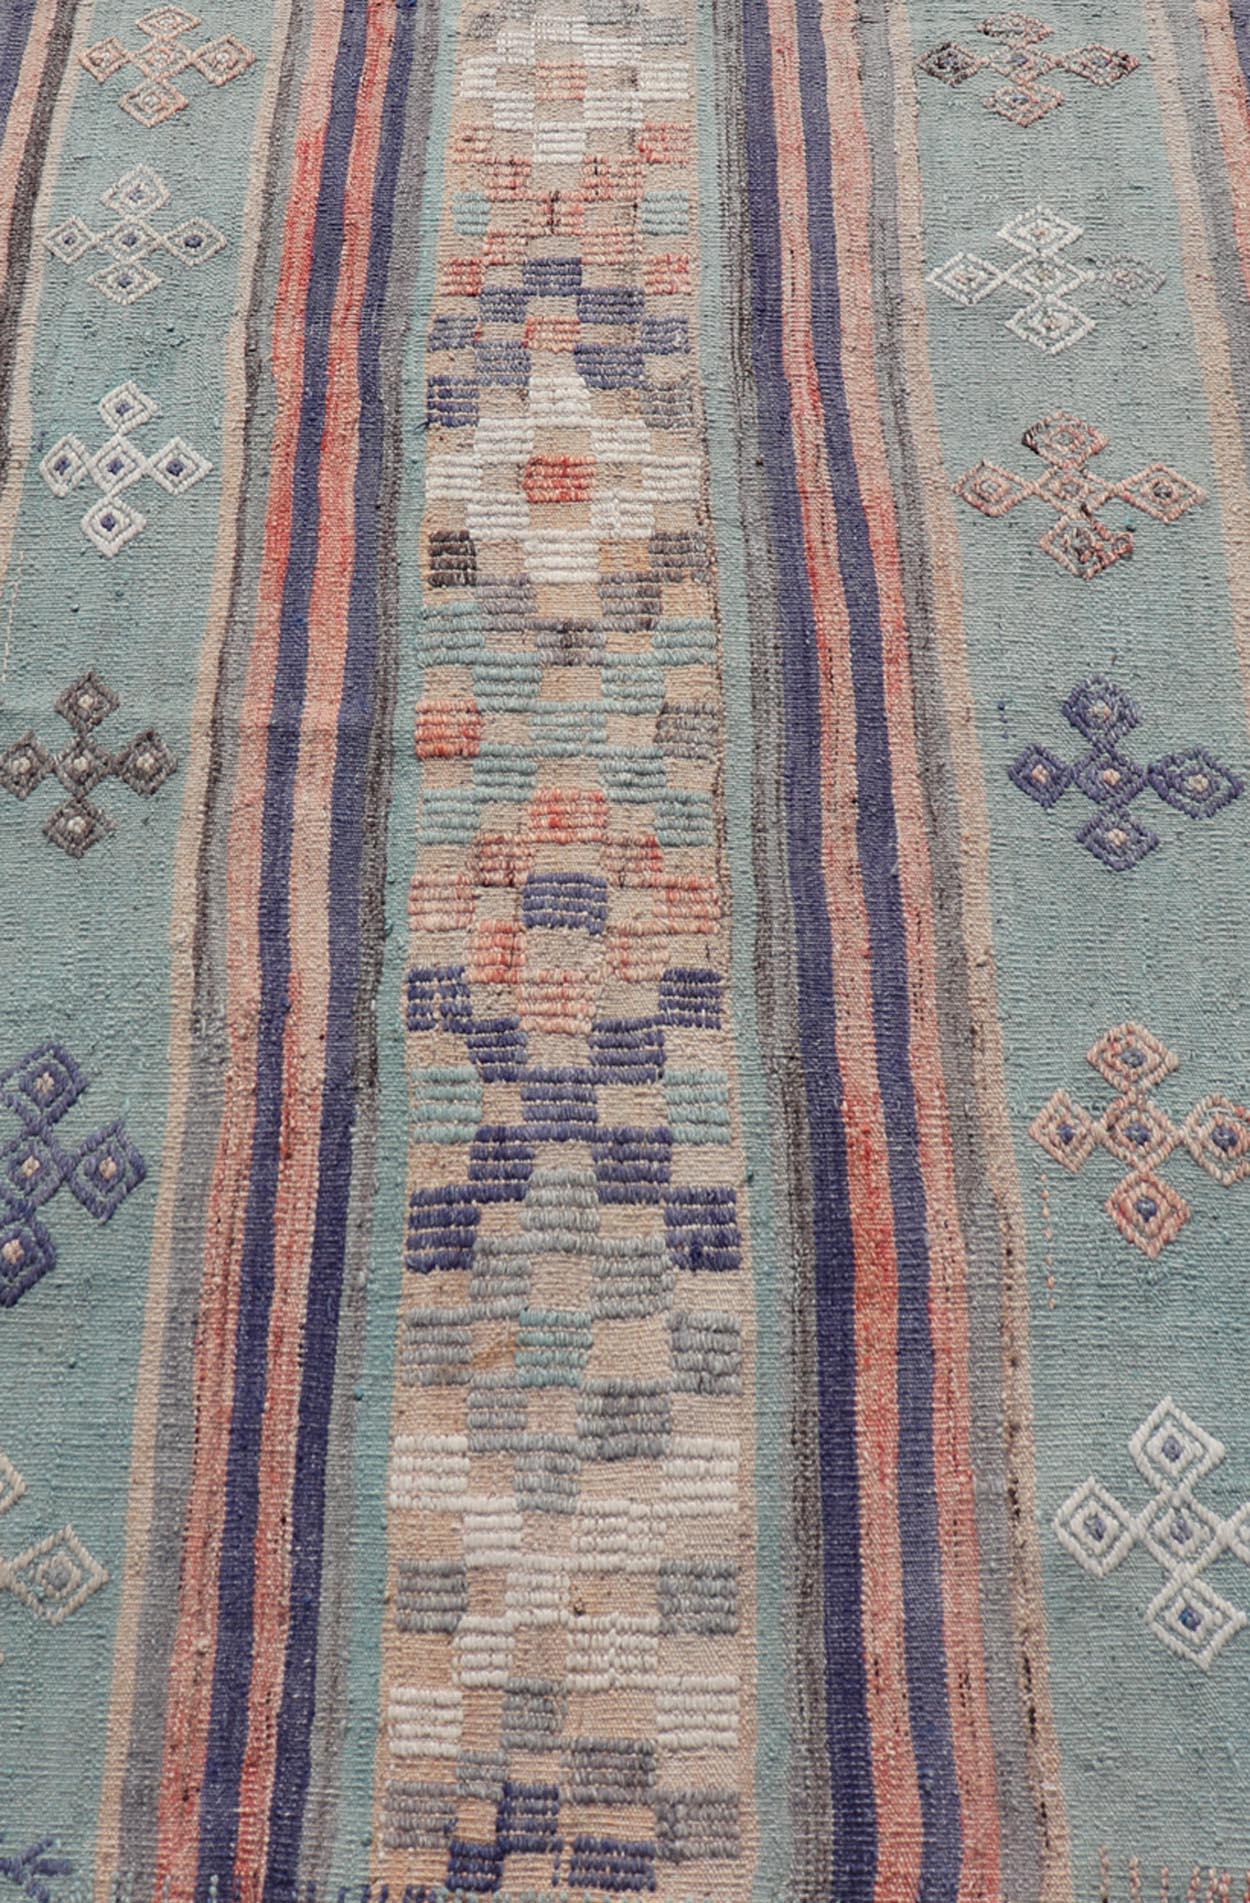 Measures: 3'6 x 5'5 
Stripe Design Turkish vintage flat-weave rug in light green, purple, and peach. Keivan Woven Arts / rug TU-NED-5018, country of origin / type: Turkey / Kilim, circa 1960
This vintage Turkish Kilim rug features a contemporary